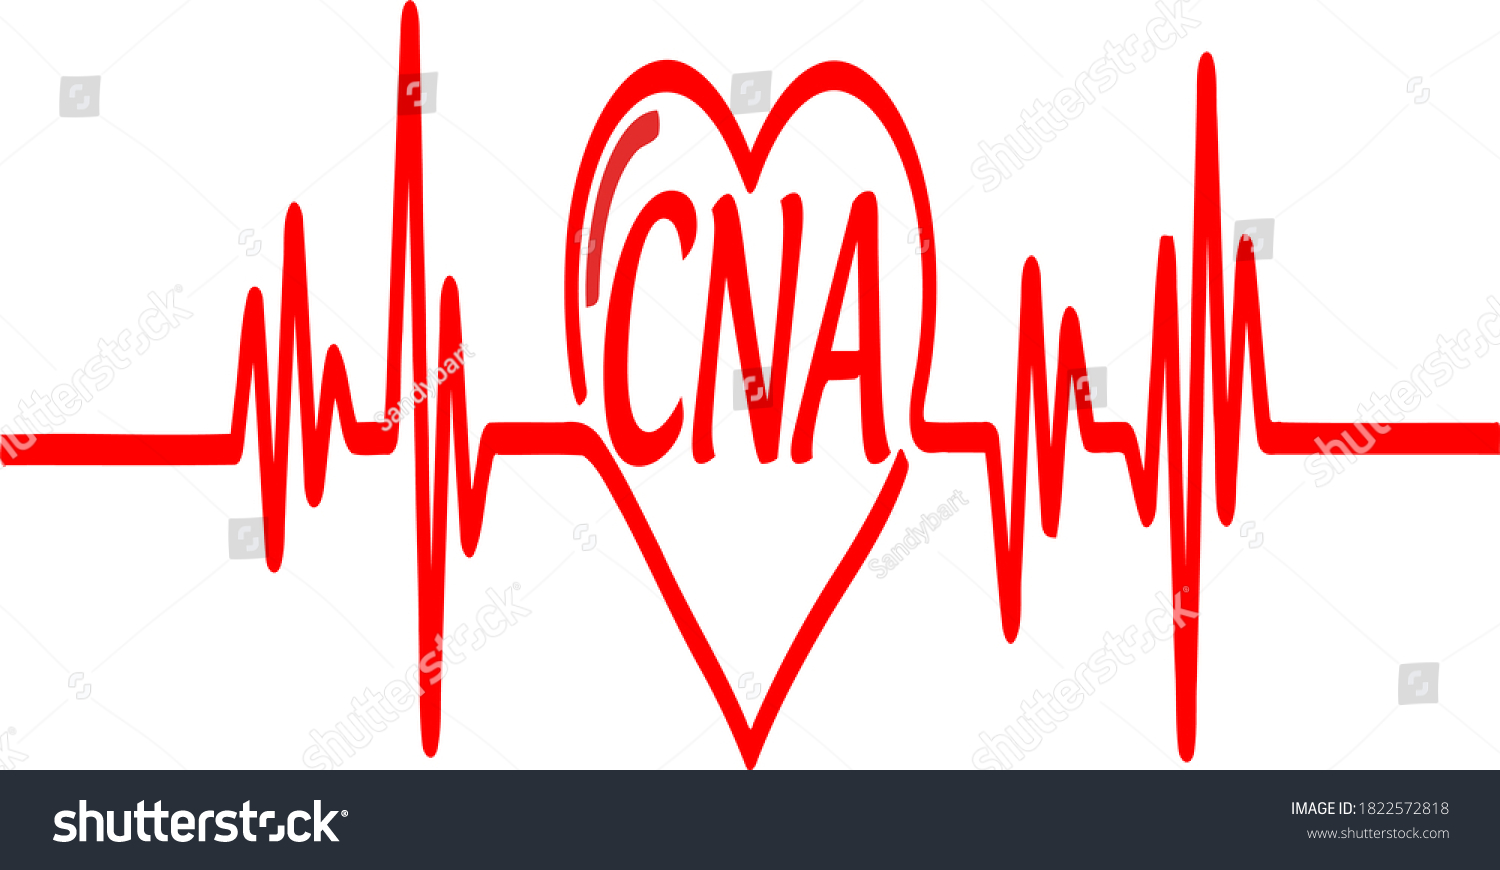 SVG of This design Cna heart pulse can be used for many projects. Grab a few files and make a weekend project or two. svg